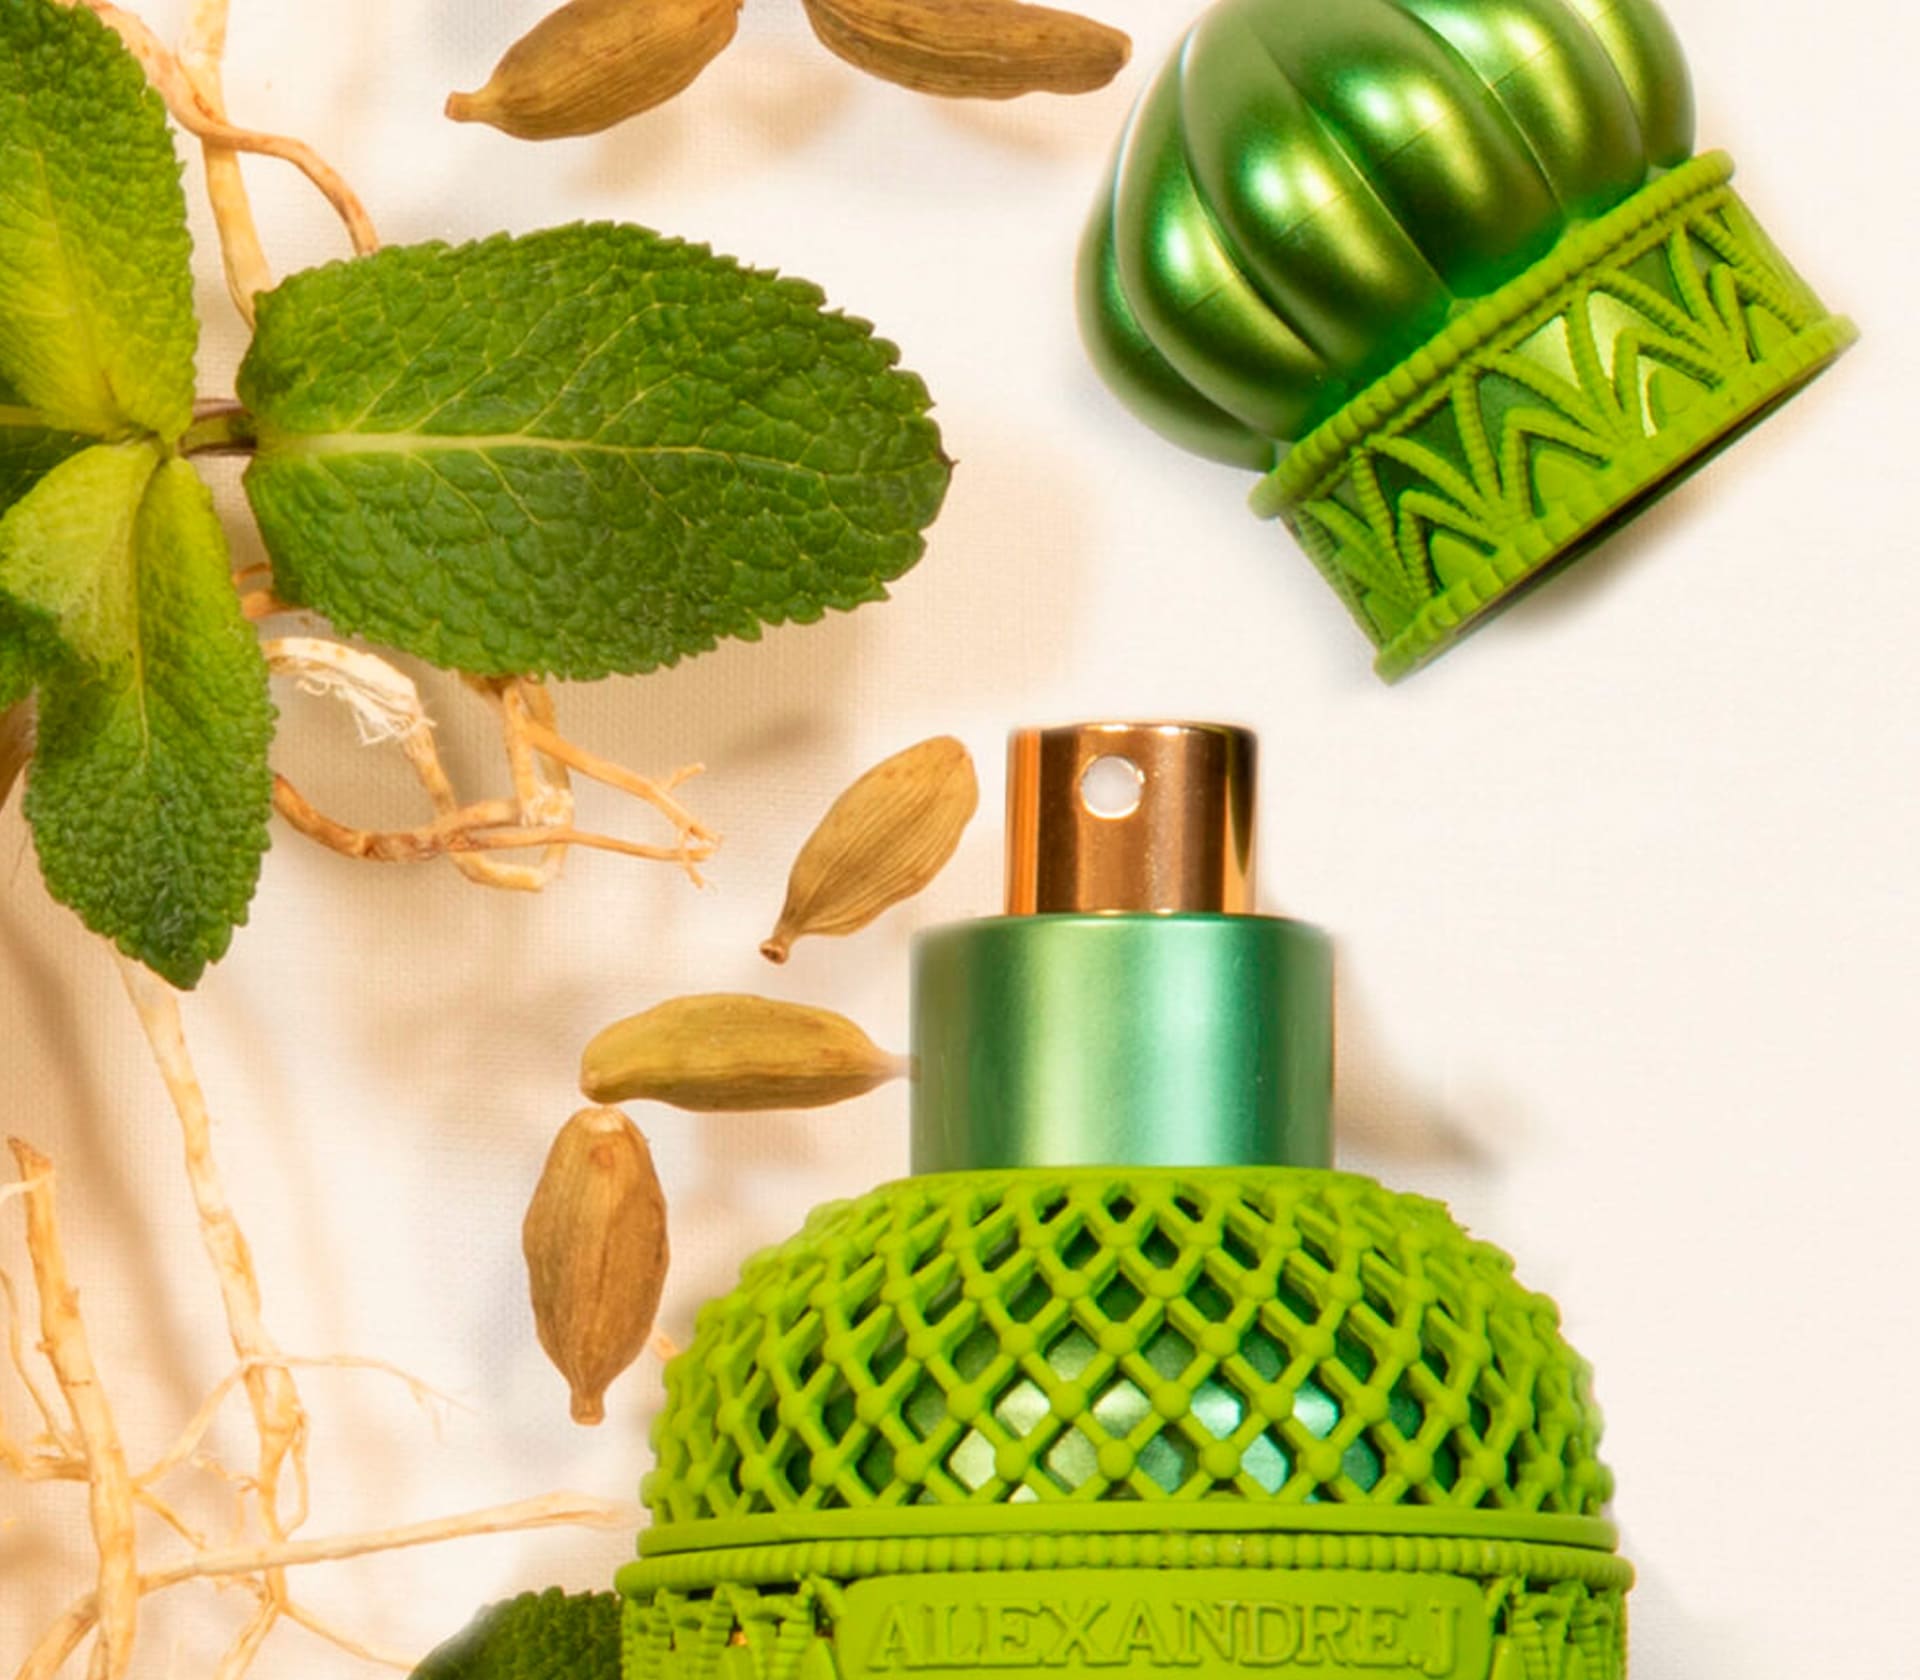 The Majestic Vetiver - 100ml